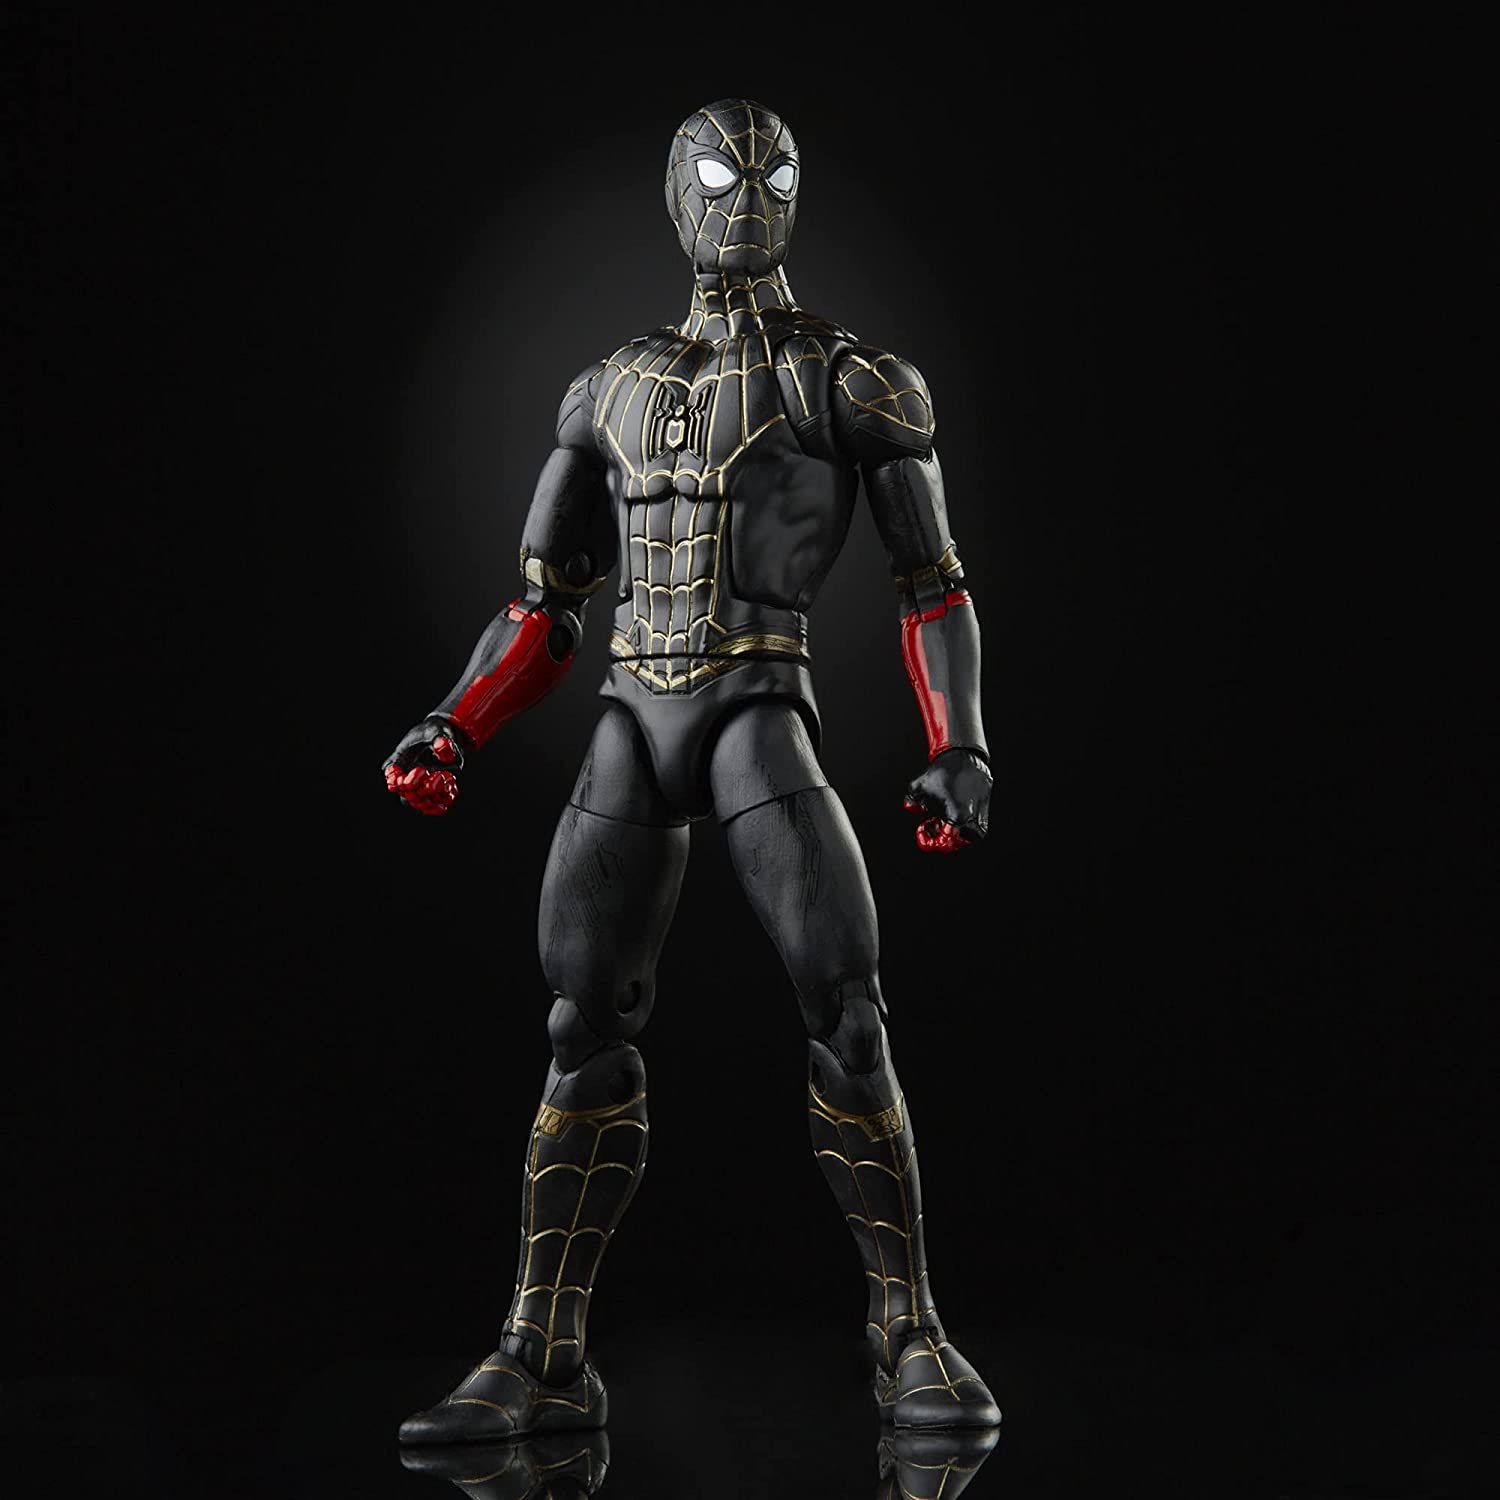 Marvel Legends Series Black & Gold Suit Spider-Man 6-inch Collectible Action Figure Toy, 2 Accessories and 1 Build-A-Figure Part(s) - Action & Toy Figures Heretoserveyou